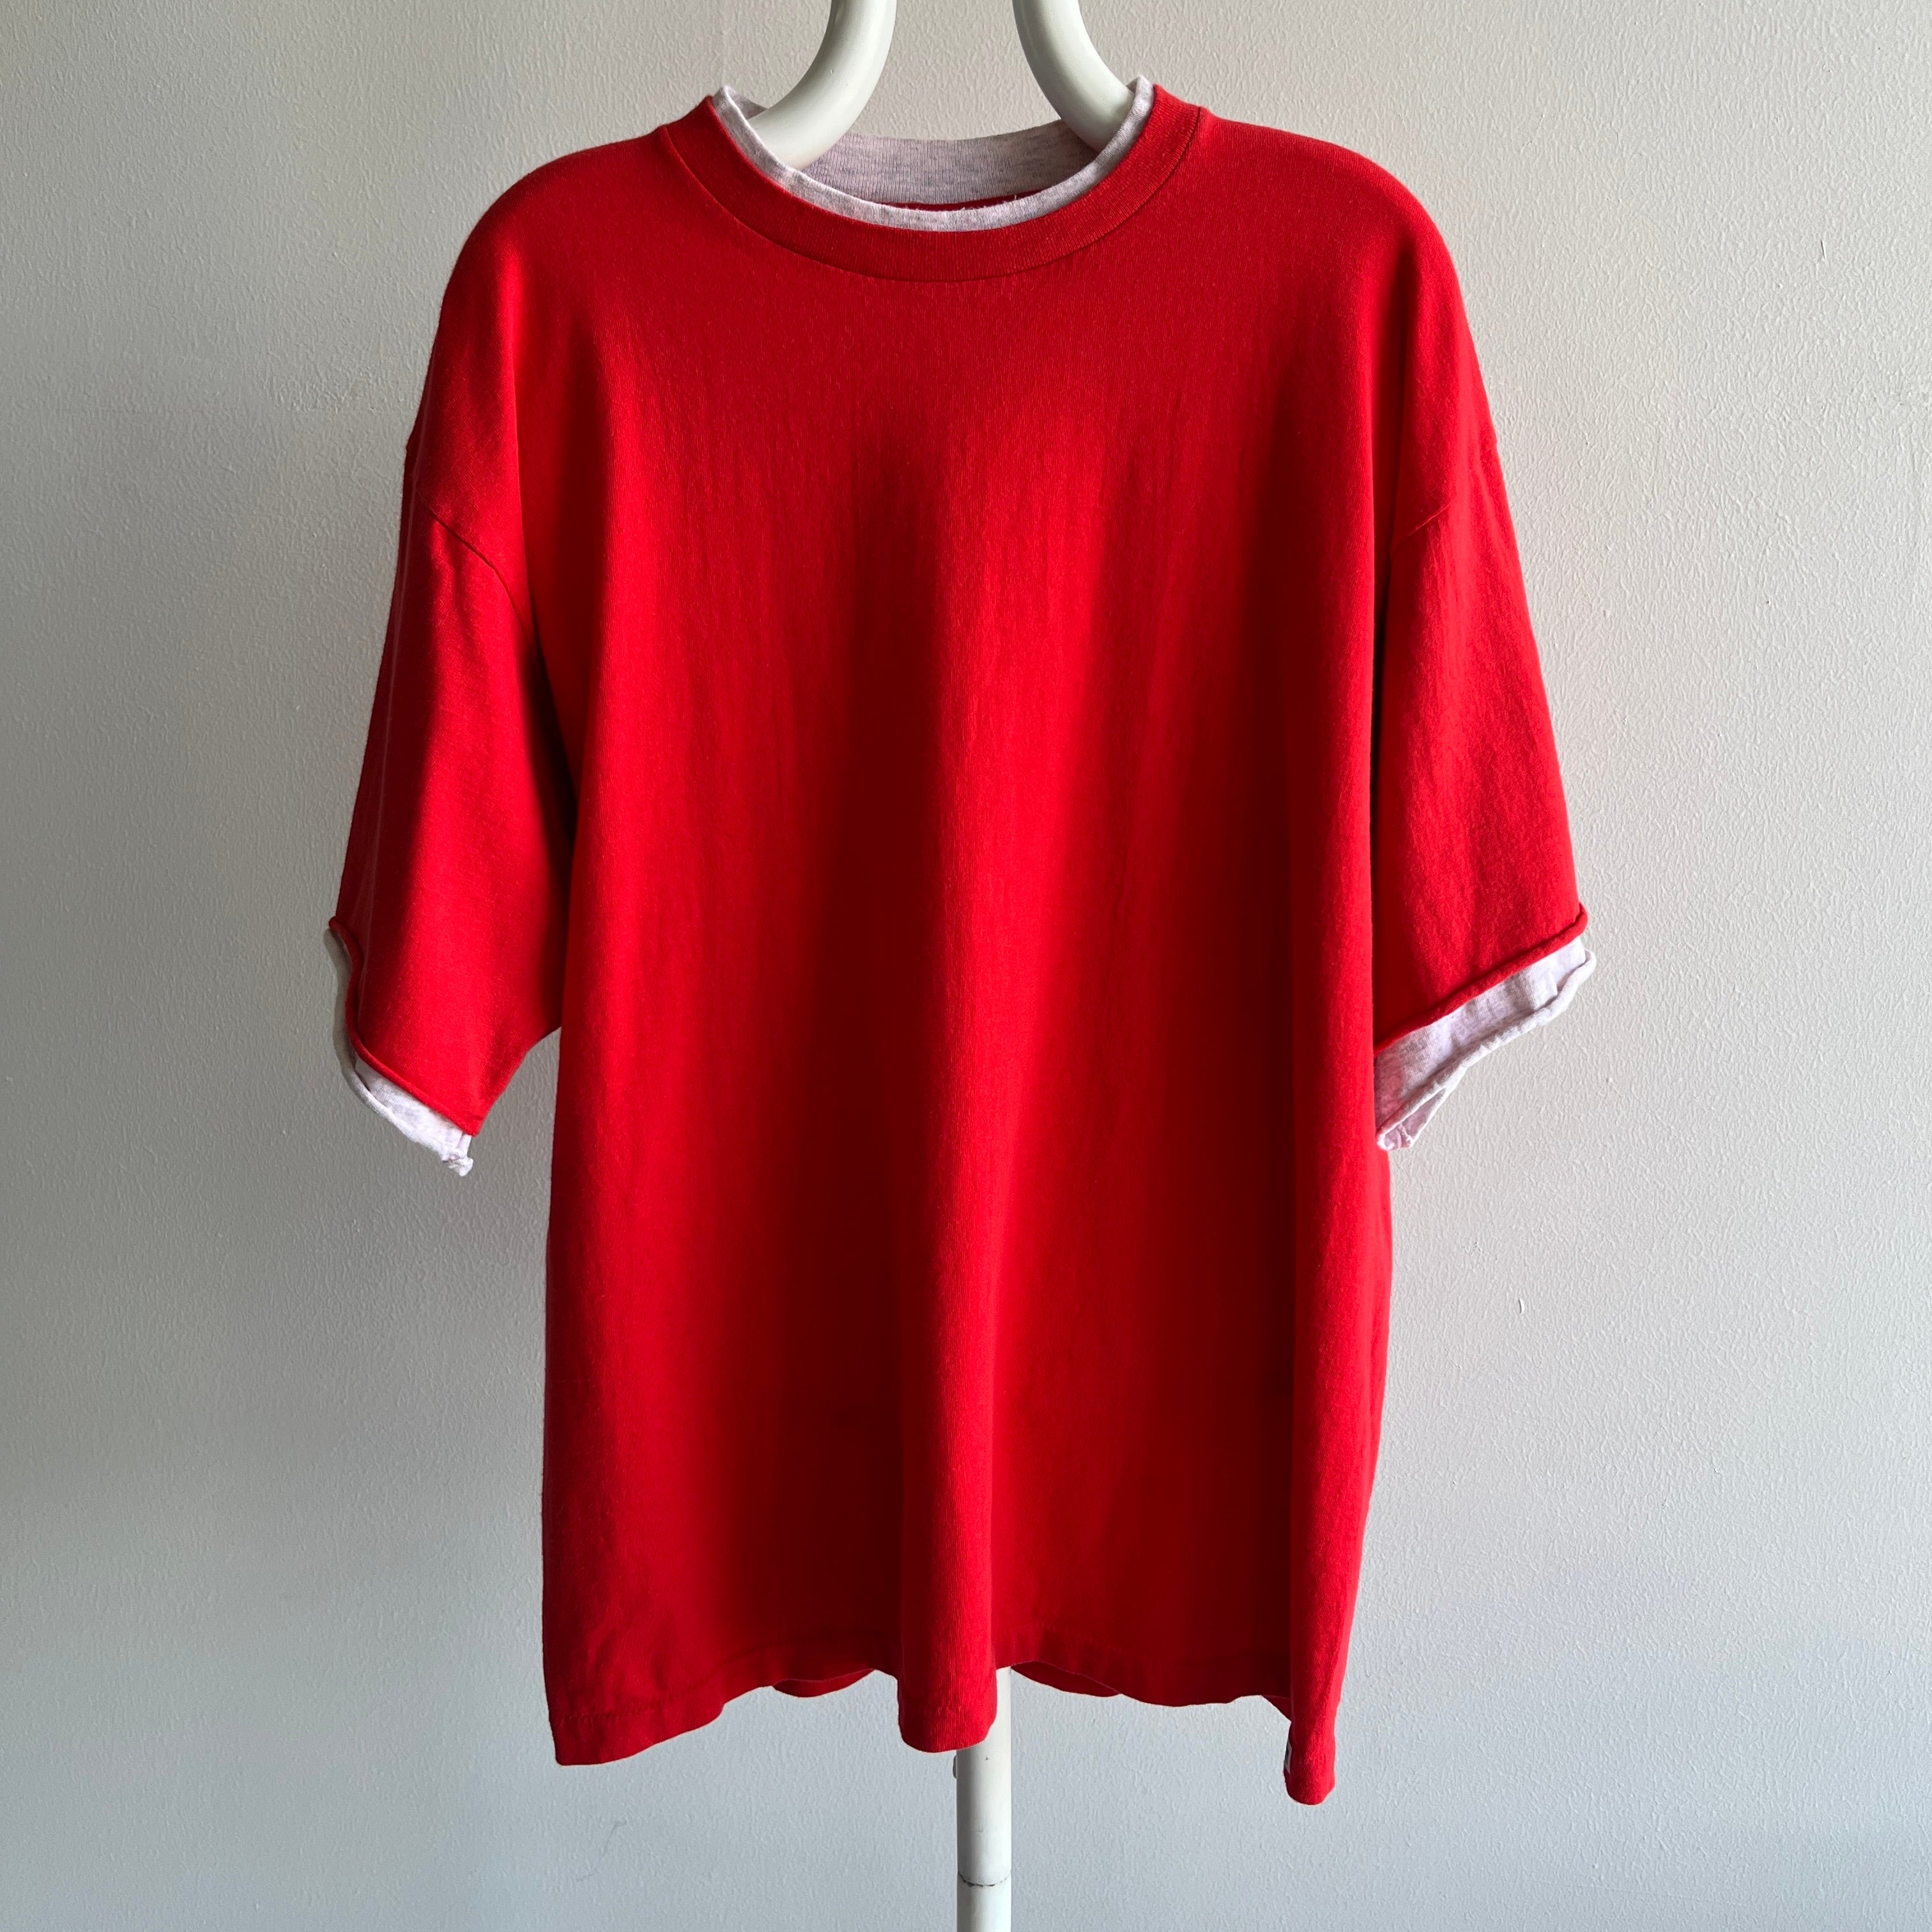 1990s Larger Blank Red Cotton T-Shirt with Two Tone Sleeves